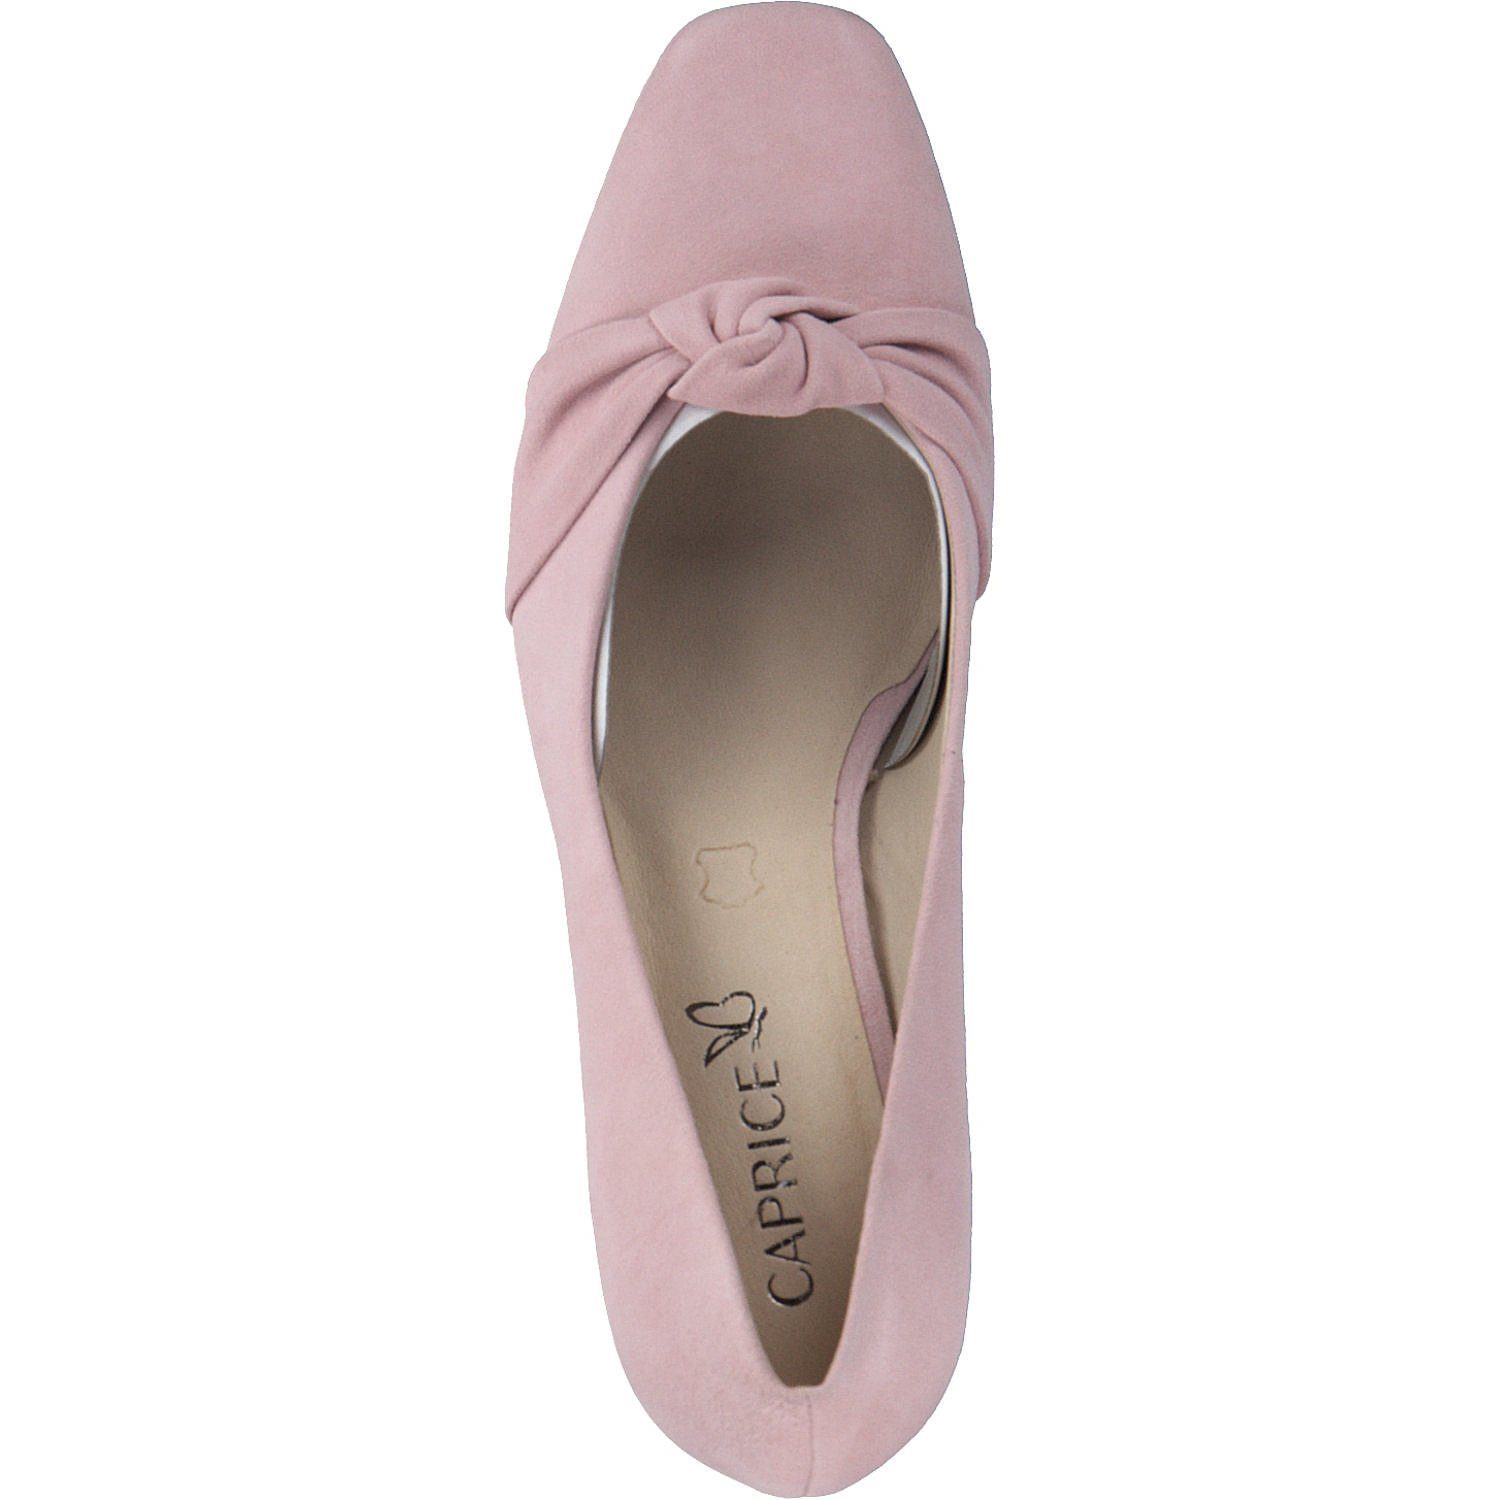 22420 Caprice (03501307) SUEDE CANDY Caprice Pumps